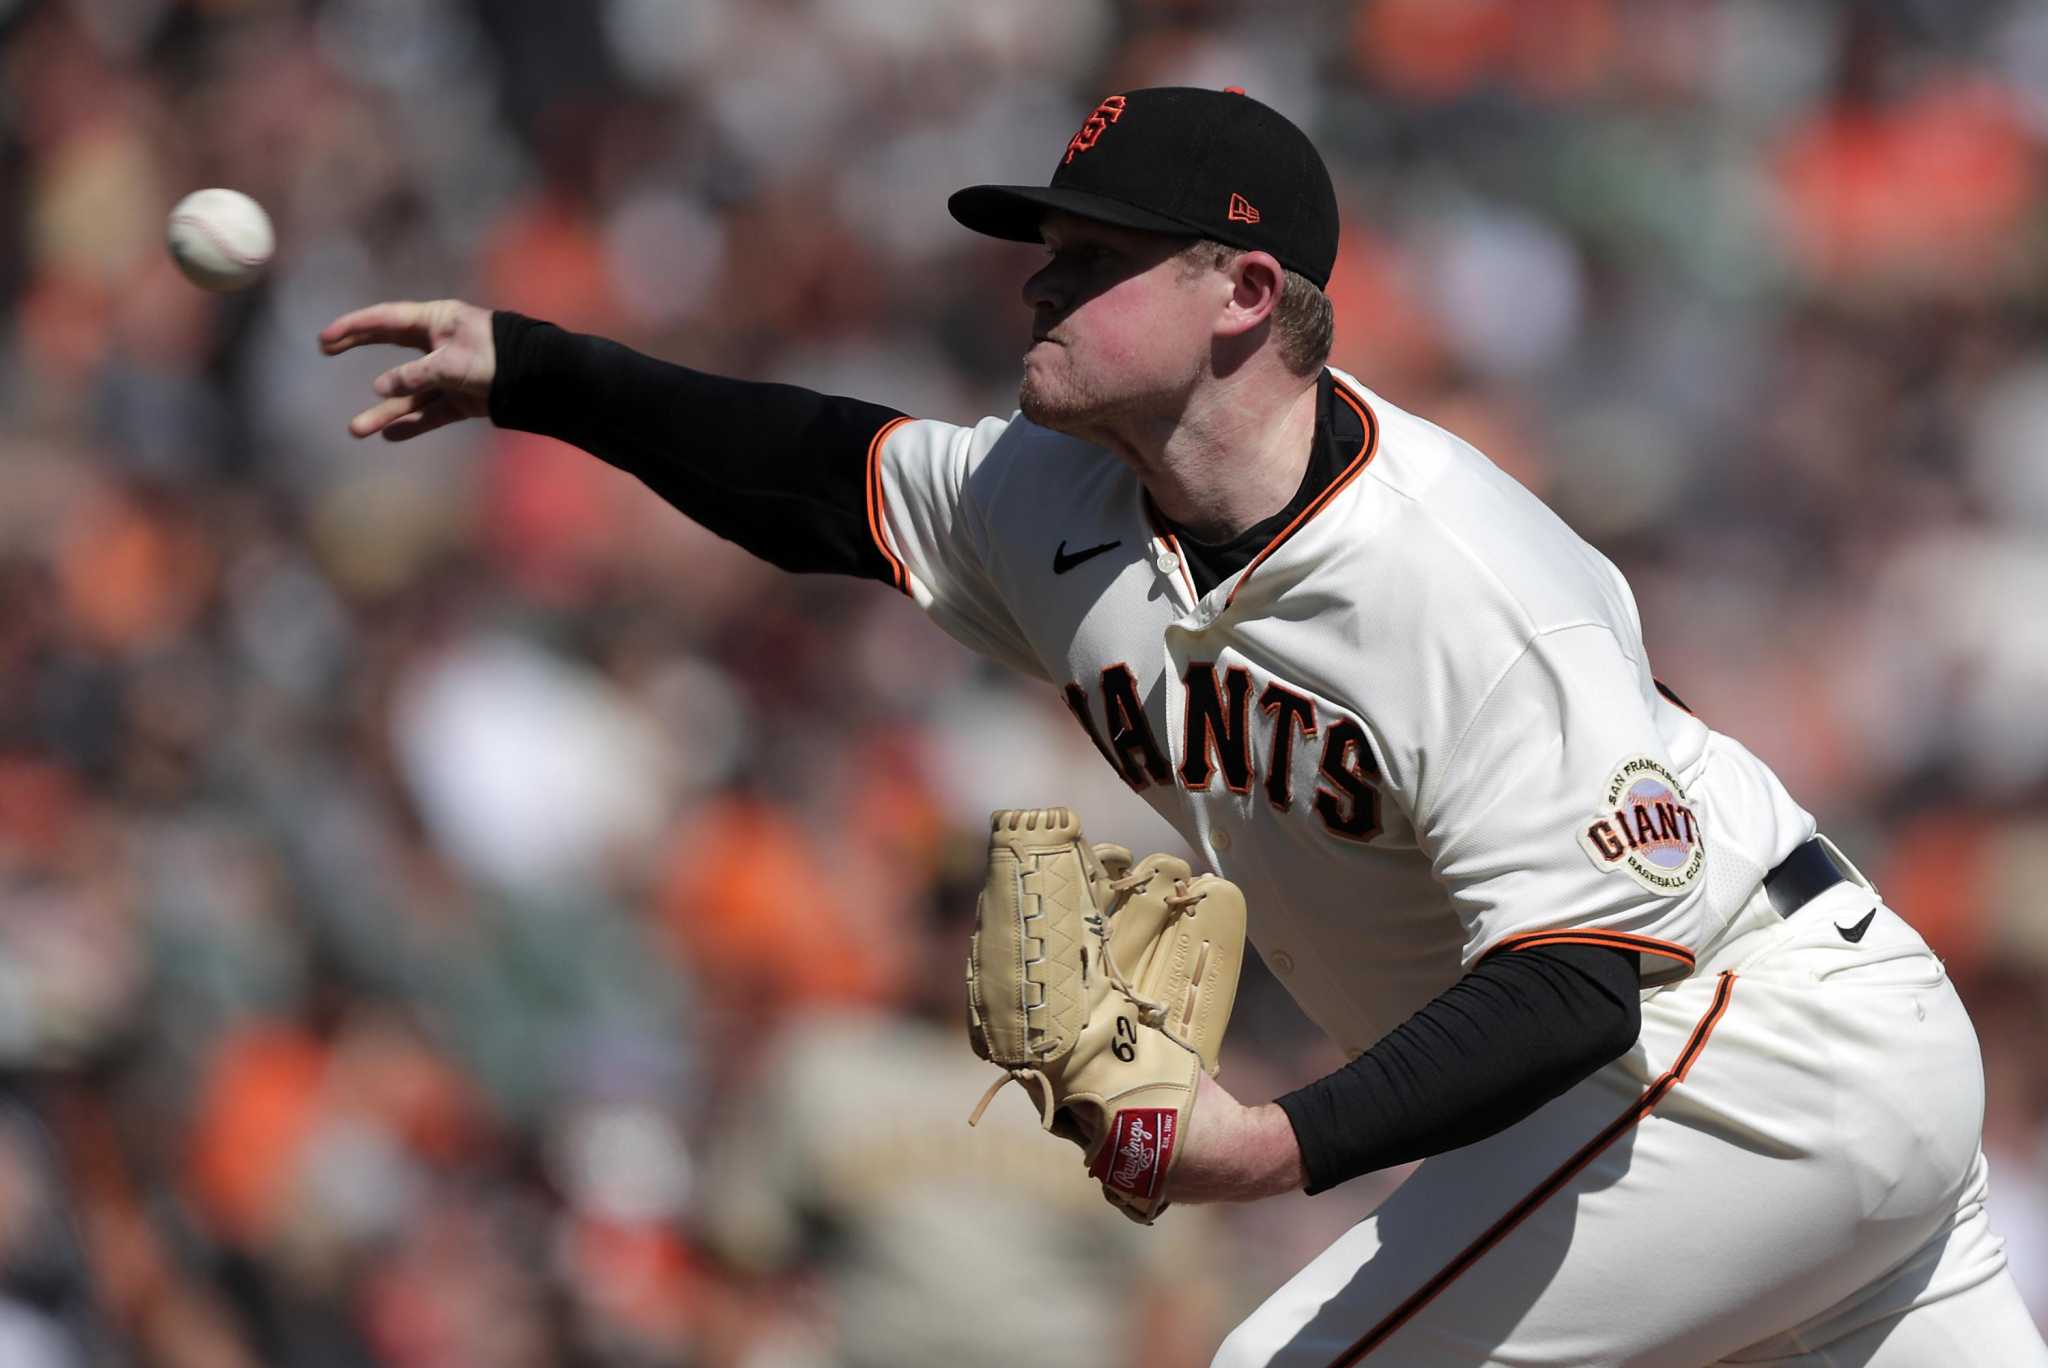 Rocklin's Logan Webb set to pitch for Giants in game 5 against Dodgers